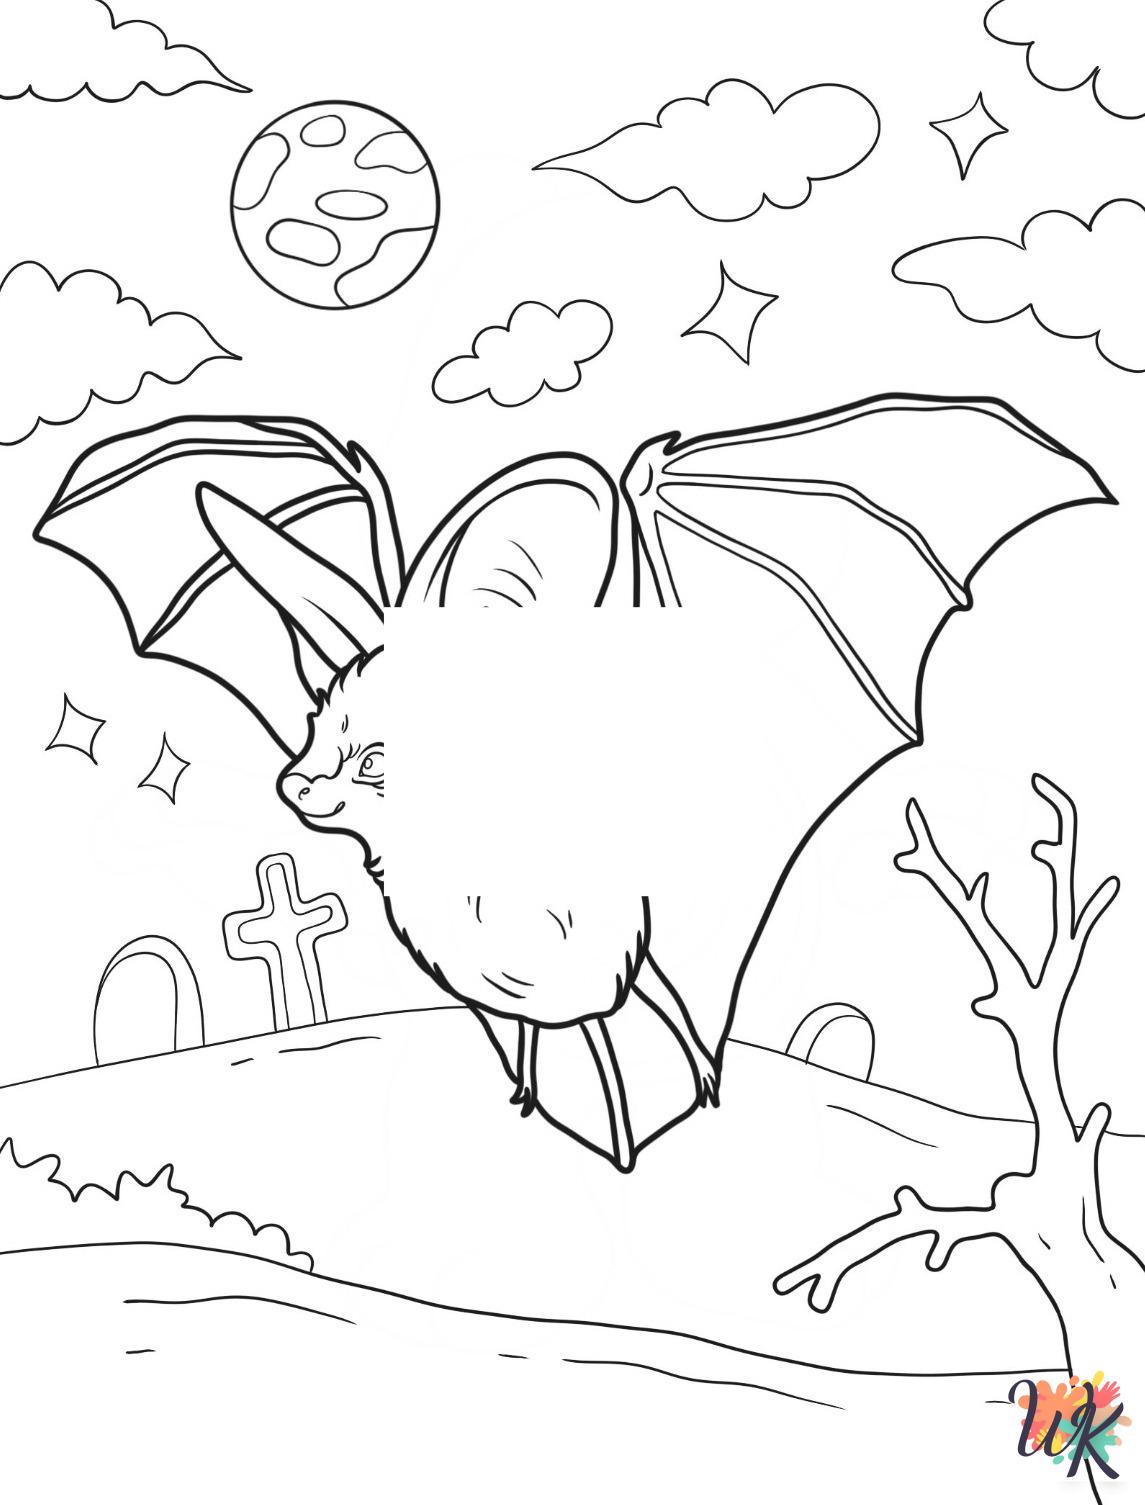 Bat coloring pages to print